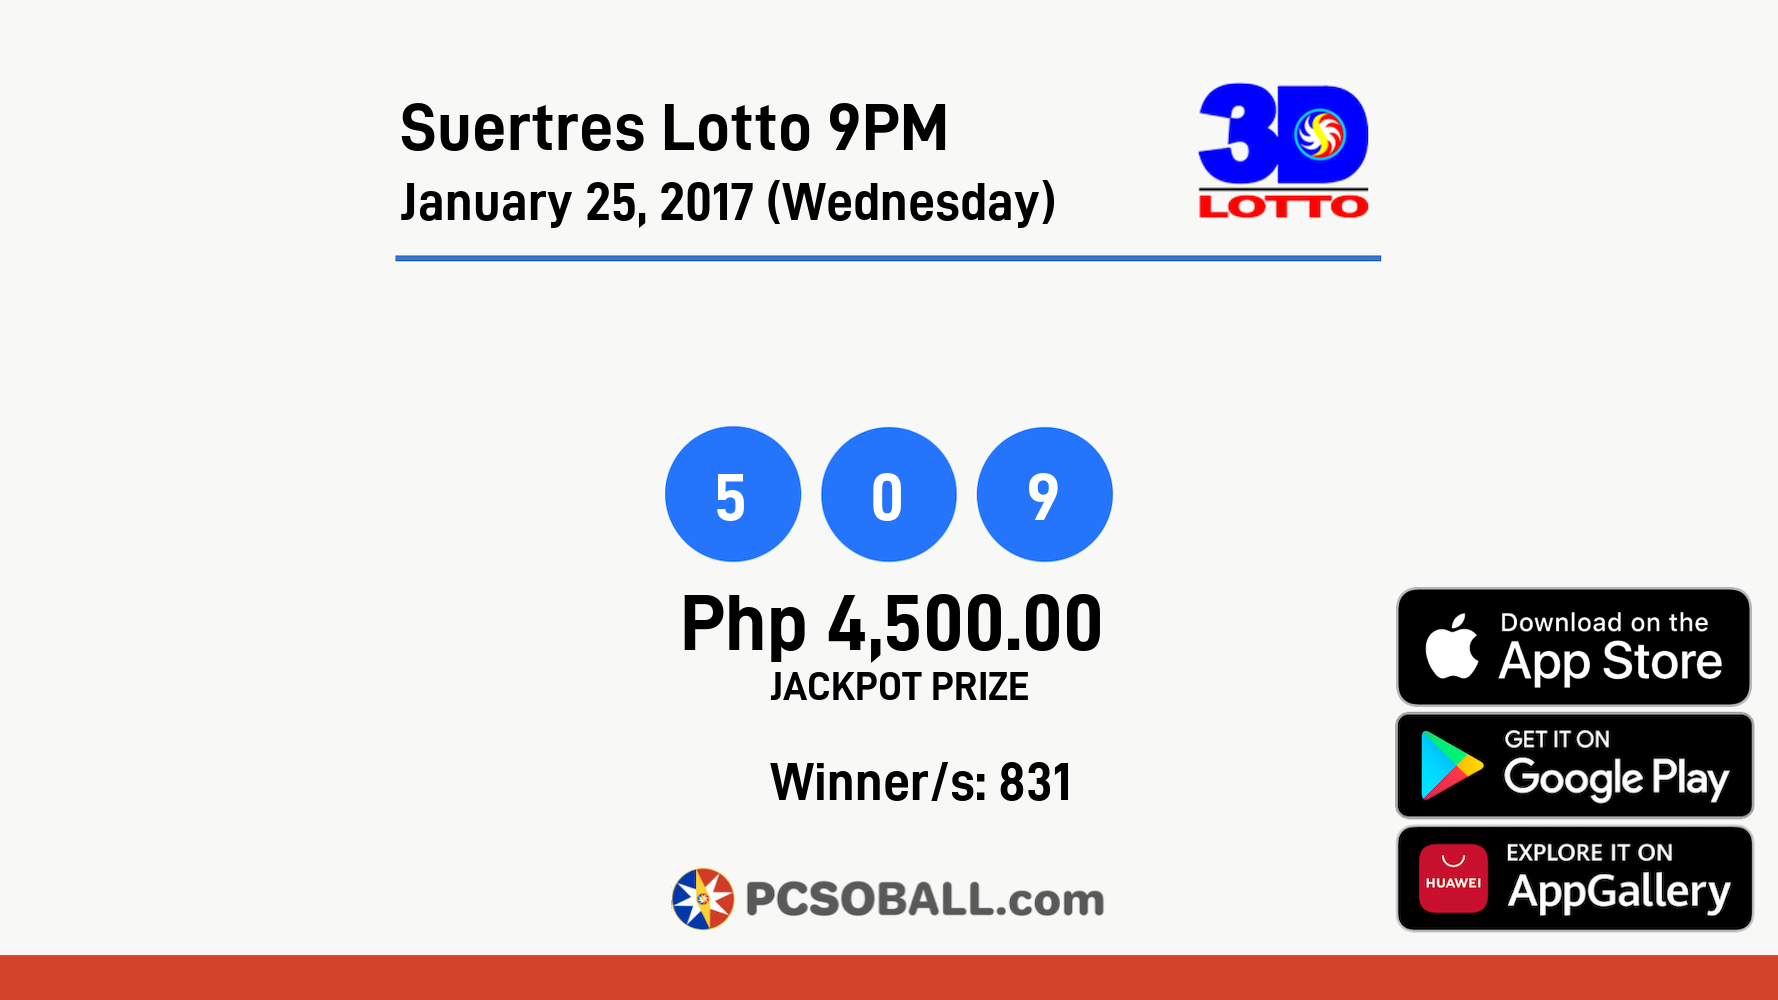 Suertres Lotto 9PM January 25, 2017 (Wednesday) Result